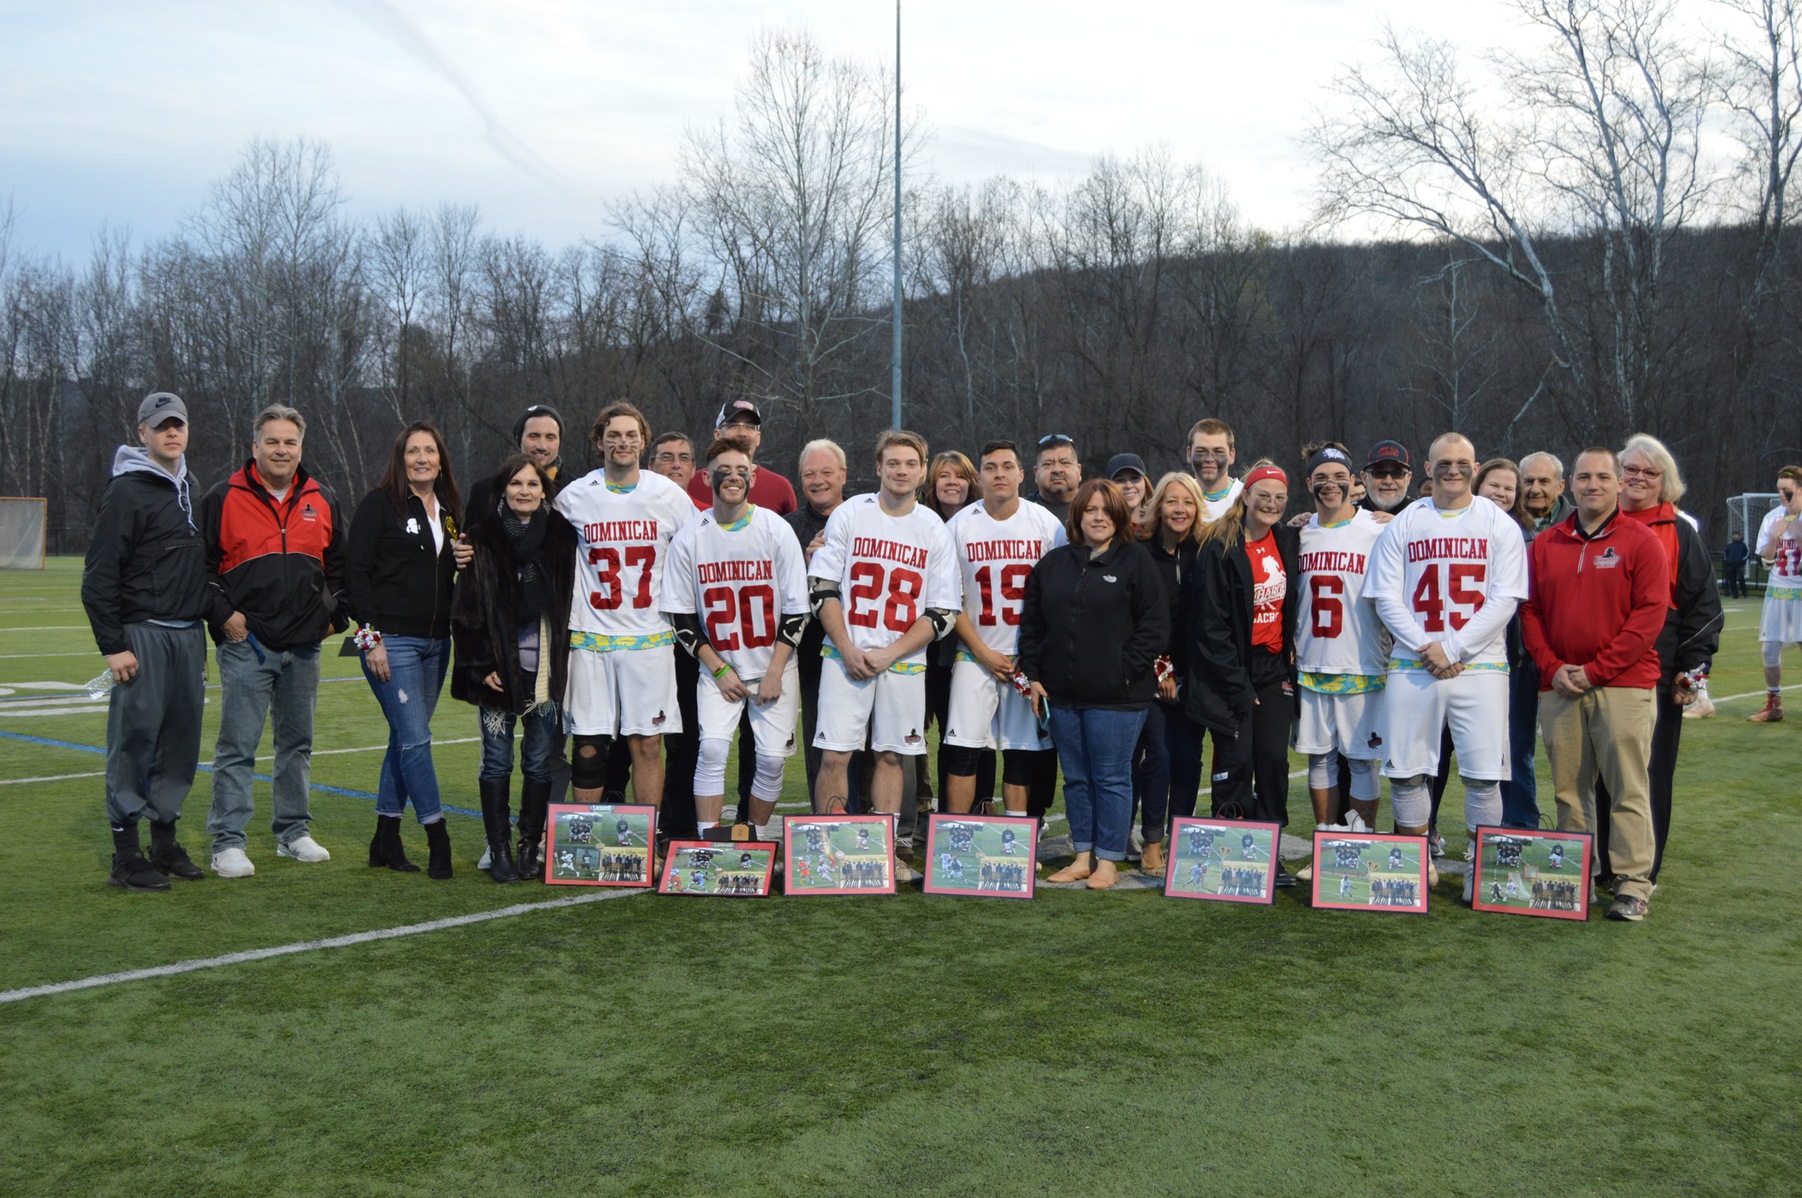 The Charger lacrosse team was victorious on Senior Night as they defeated Felician University.